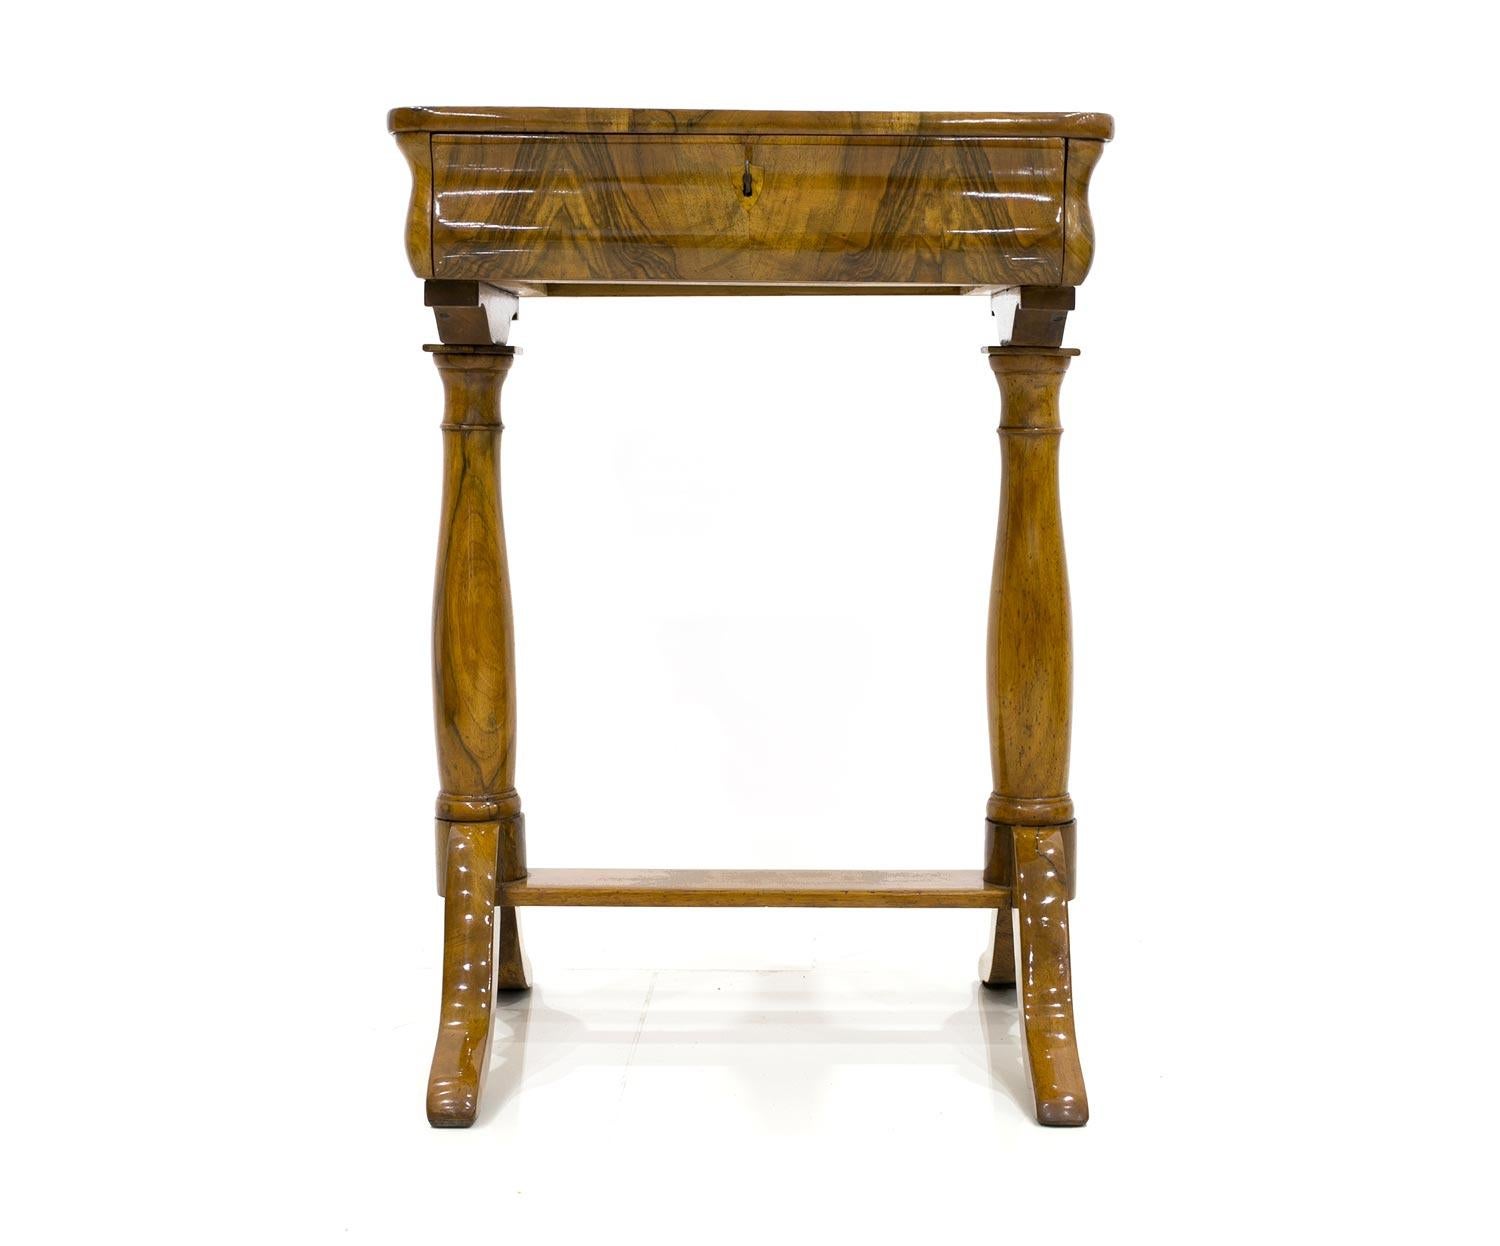 Decorative table, so-called thread table in the Biedermeier style. The furniture has been subjected to very delicate and professional restoration. The origin country is Germany. The piece was manufactured, circa 1830. It is made of walnut wood and